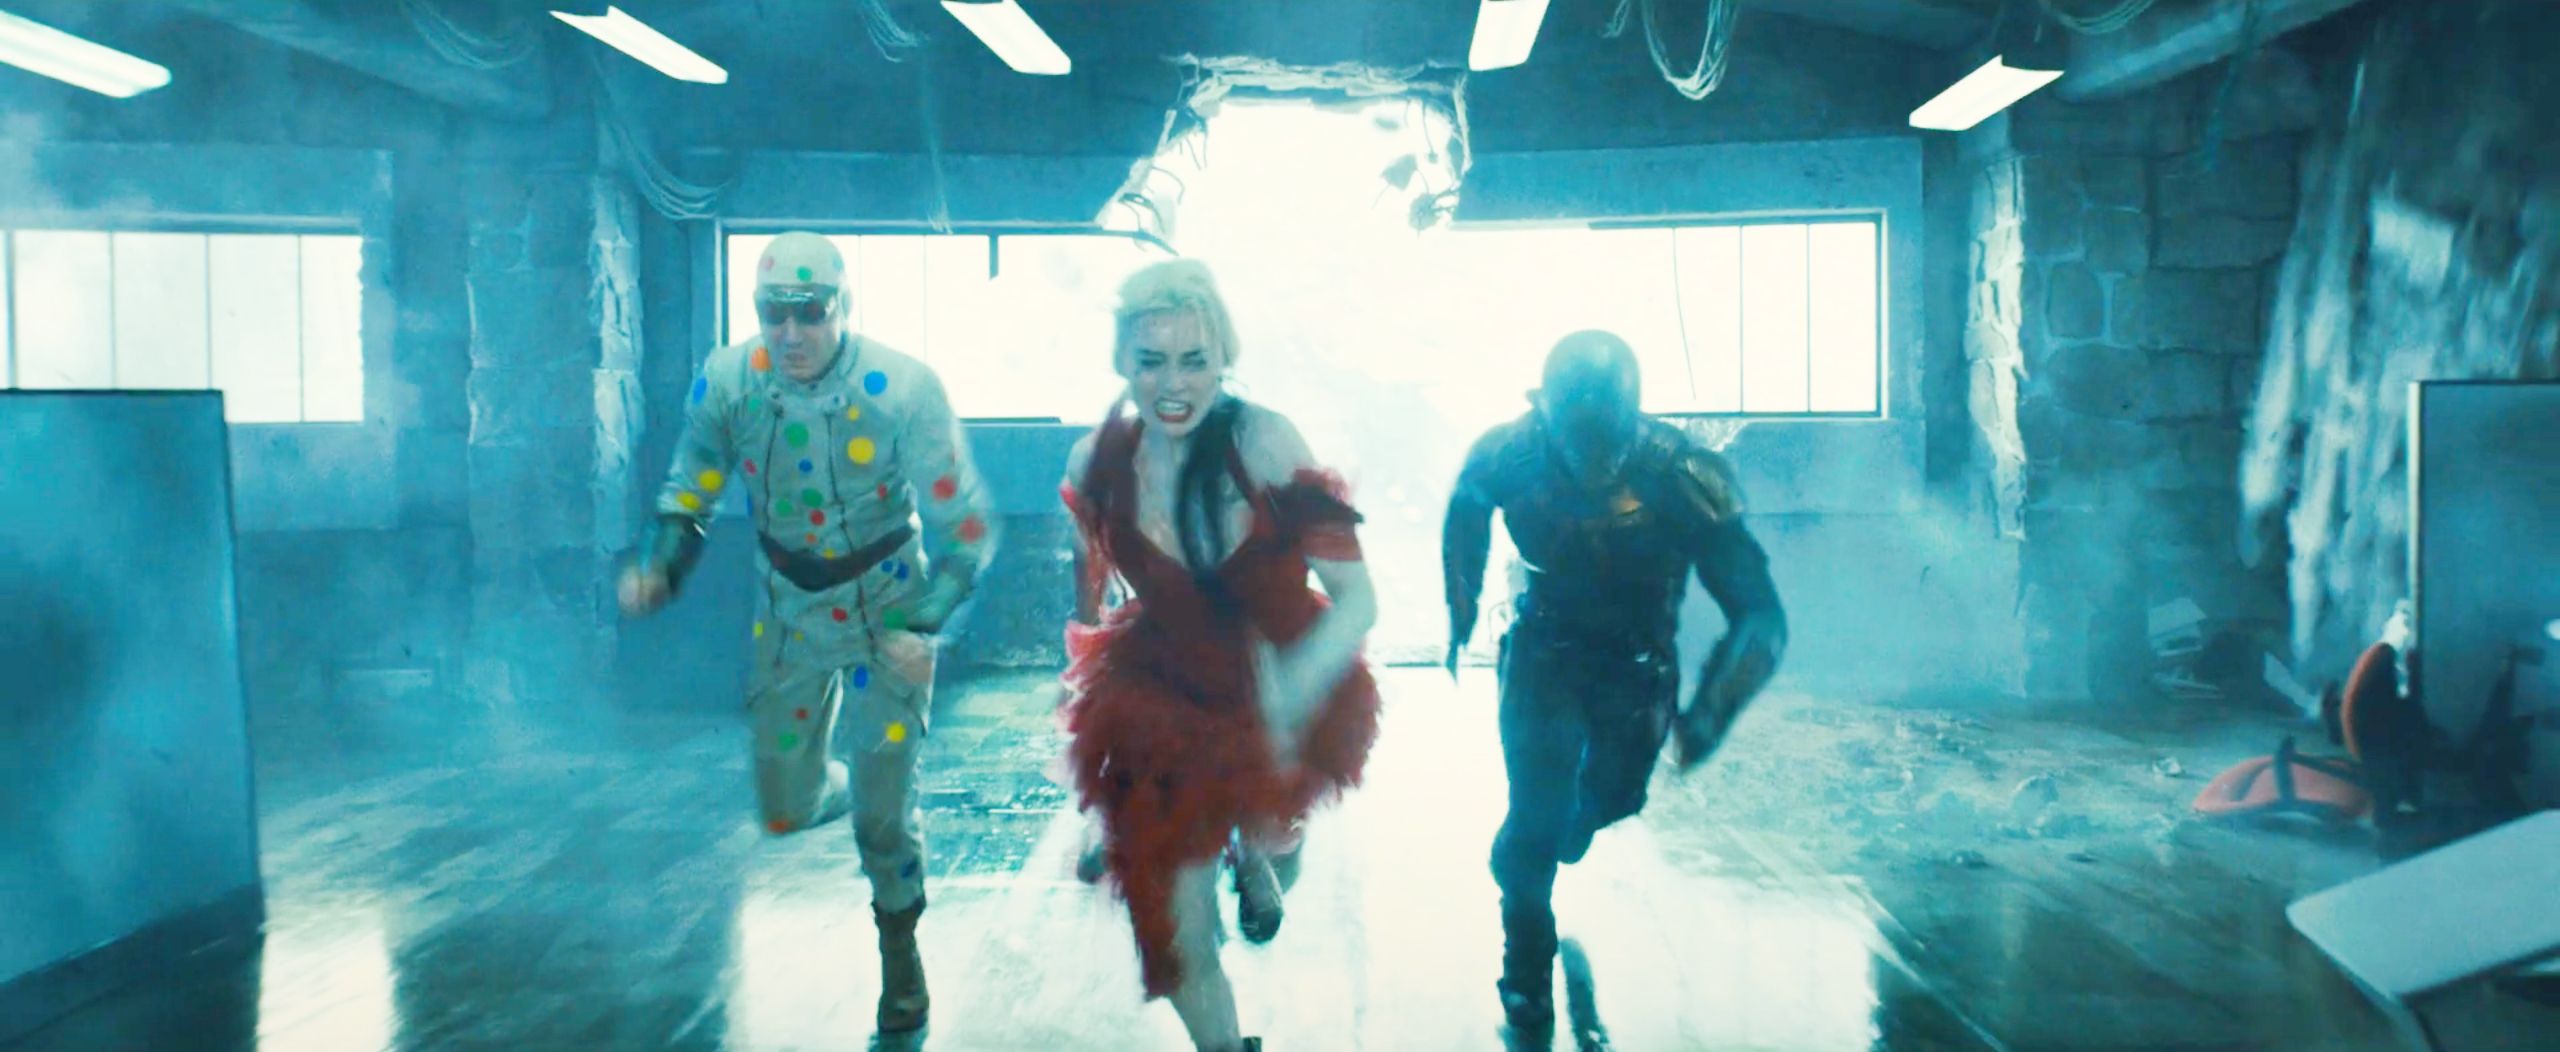 The Suicide Squad HBO Max Image #5